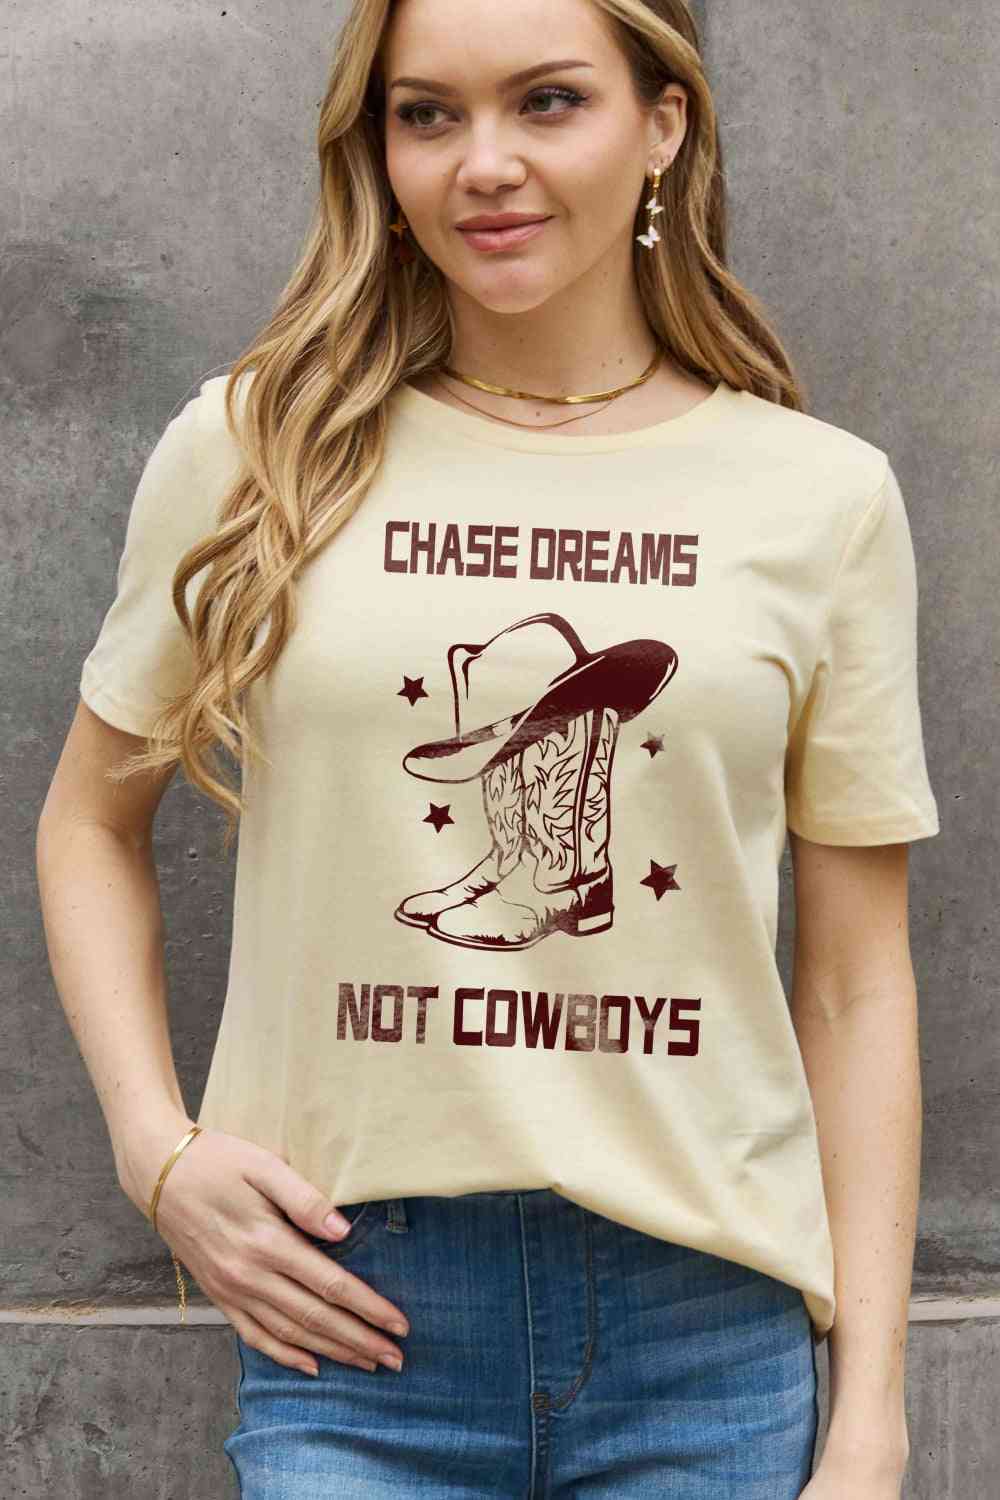 Simply Love Simply Love Full Size CHASE DREAMS NOT COWBOYS Graphic Cotton Tee